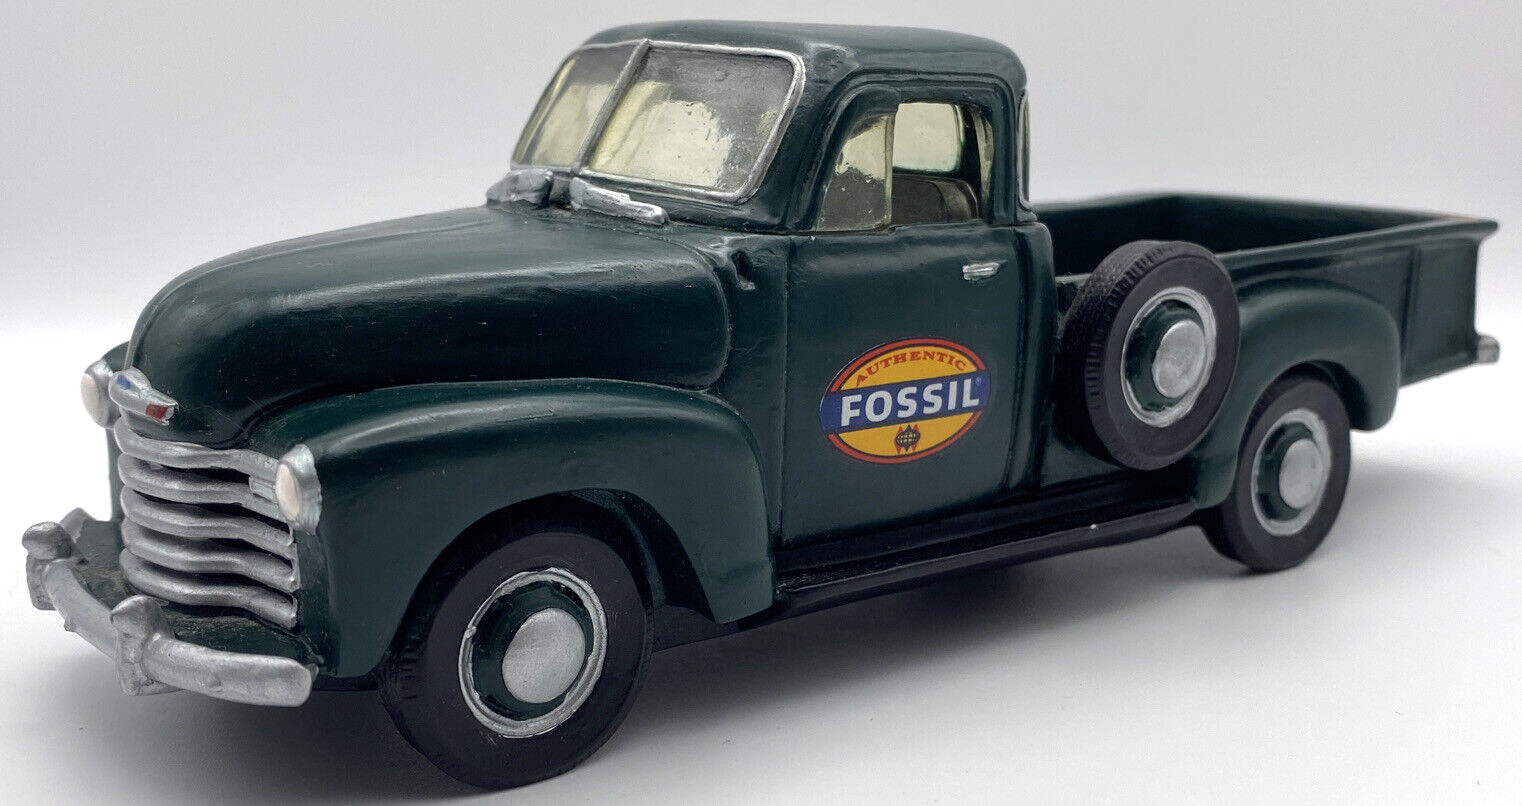 VINTAGE 1949 Green PICK-UP TRUCK FOSSIL Watch Advertising Store Display